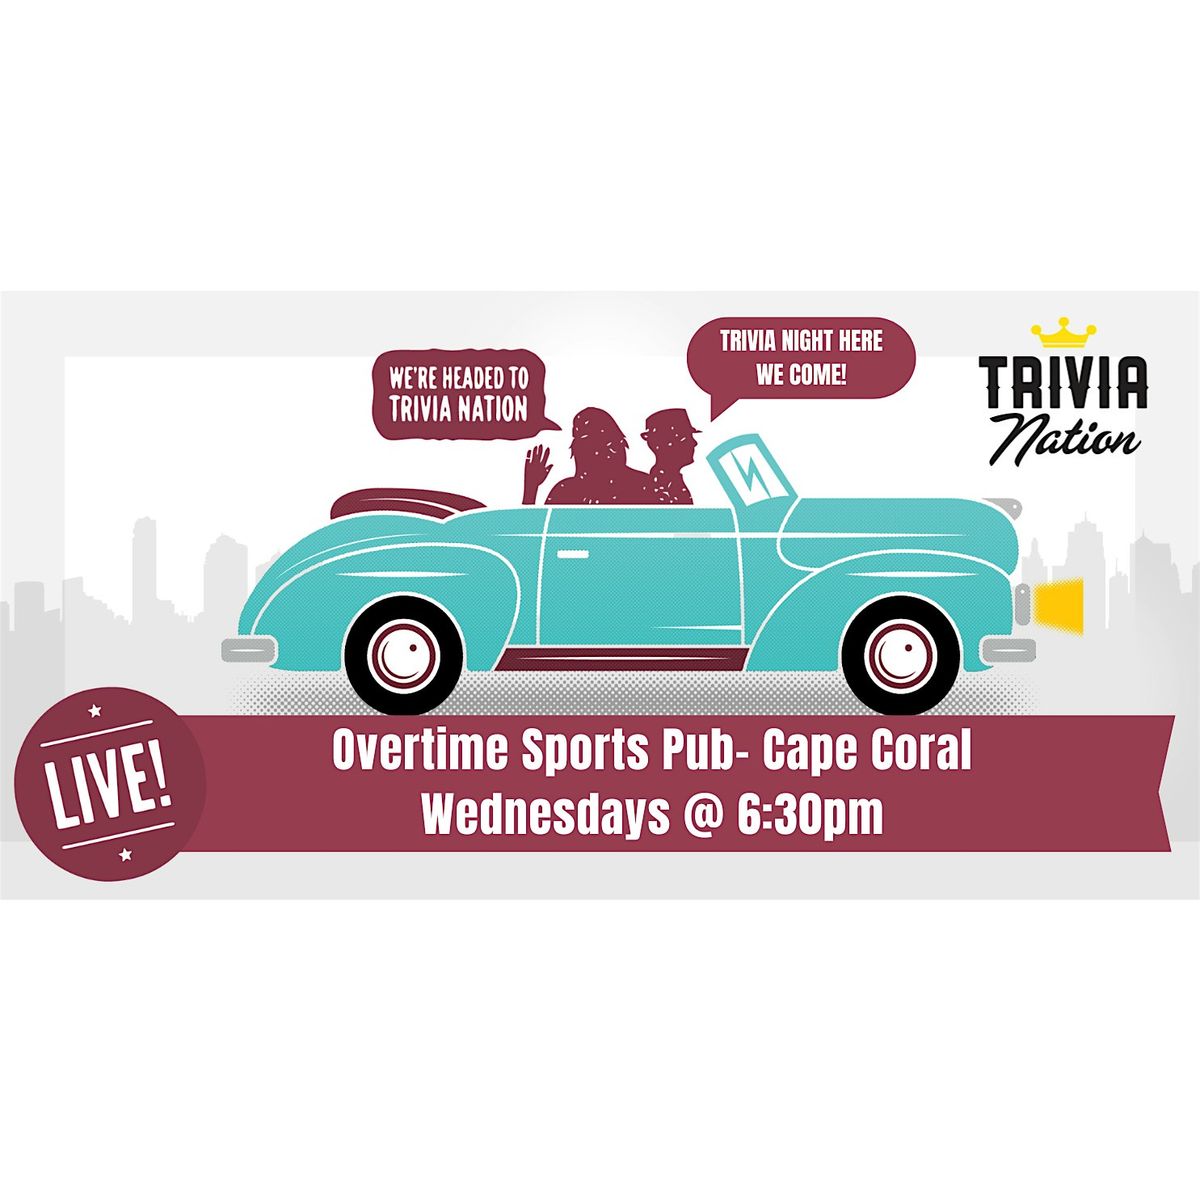 General Knowledge Trivia at Overtime Sports Pub- Cape Coral $75 in prizes!